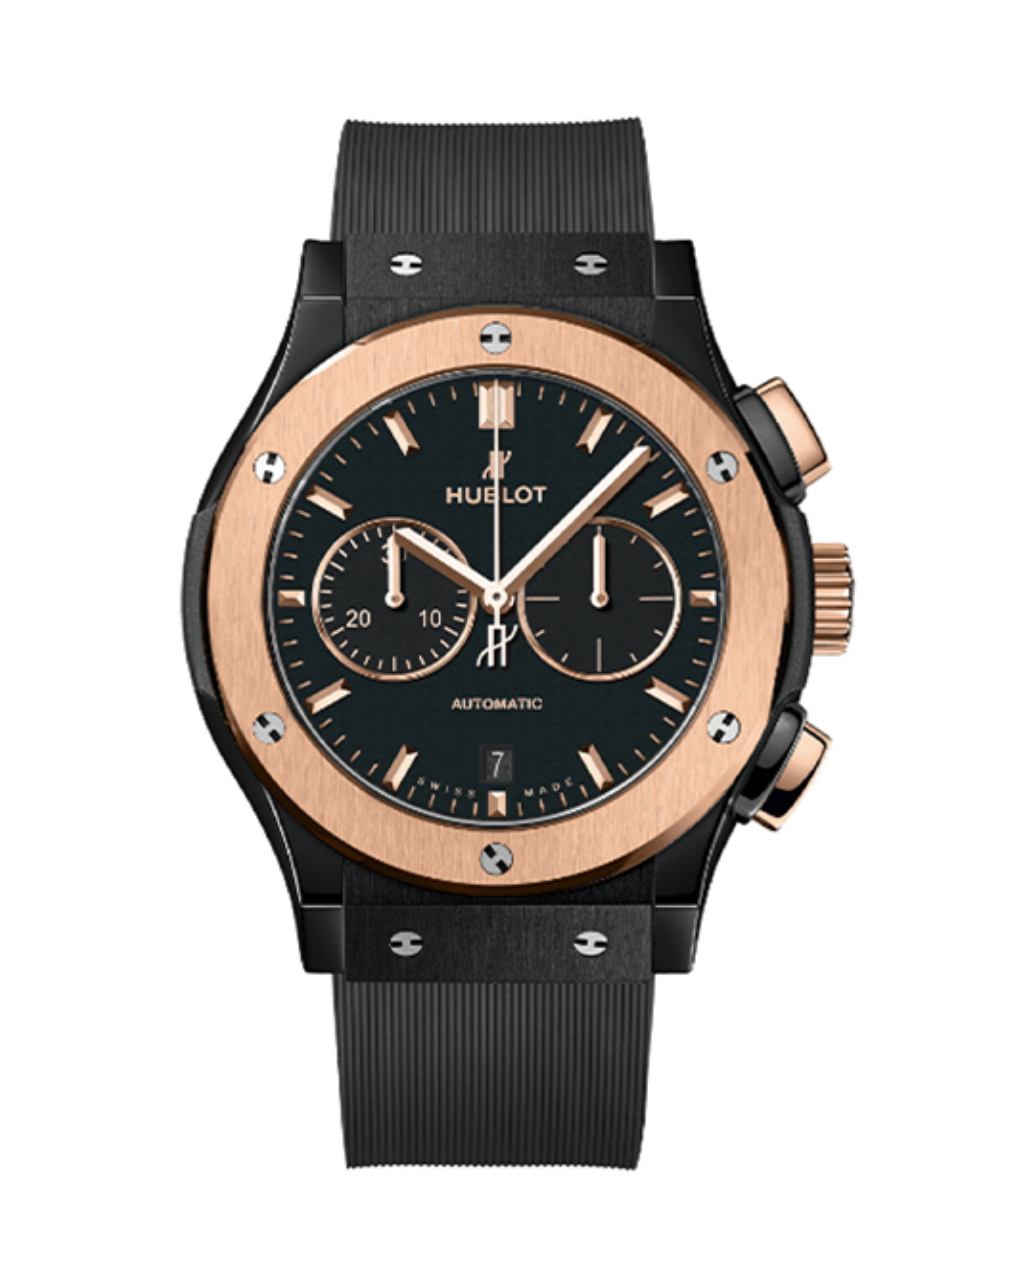 Classic Fusion Chronograph Ceramic King Gold 42mm 541.CO.1181.RX